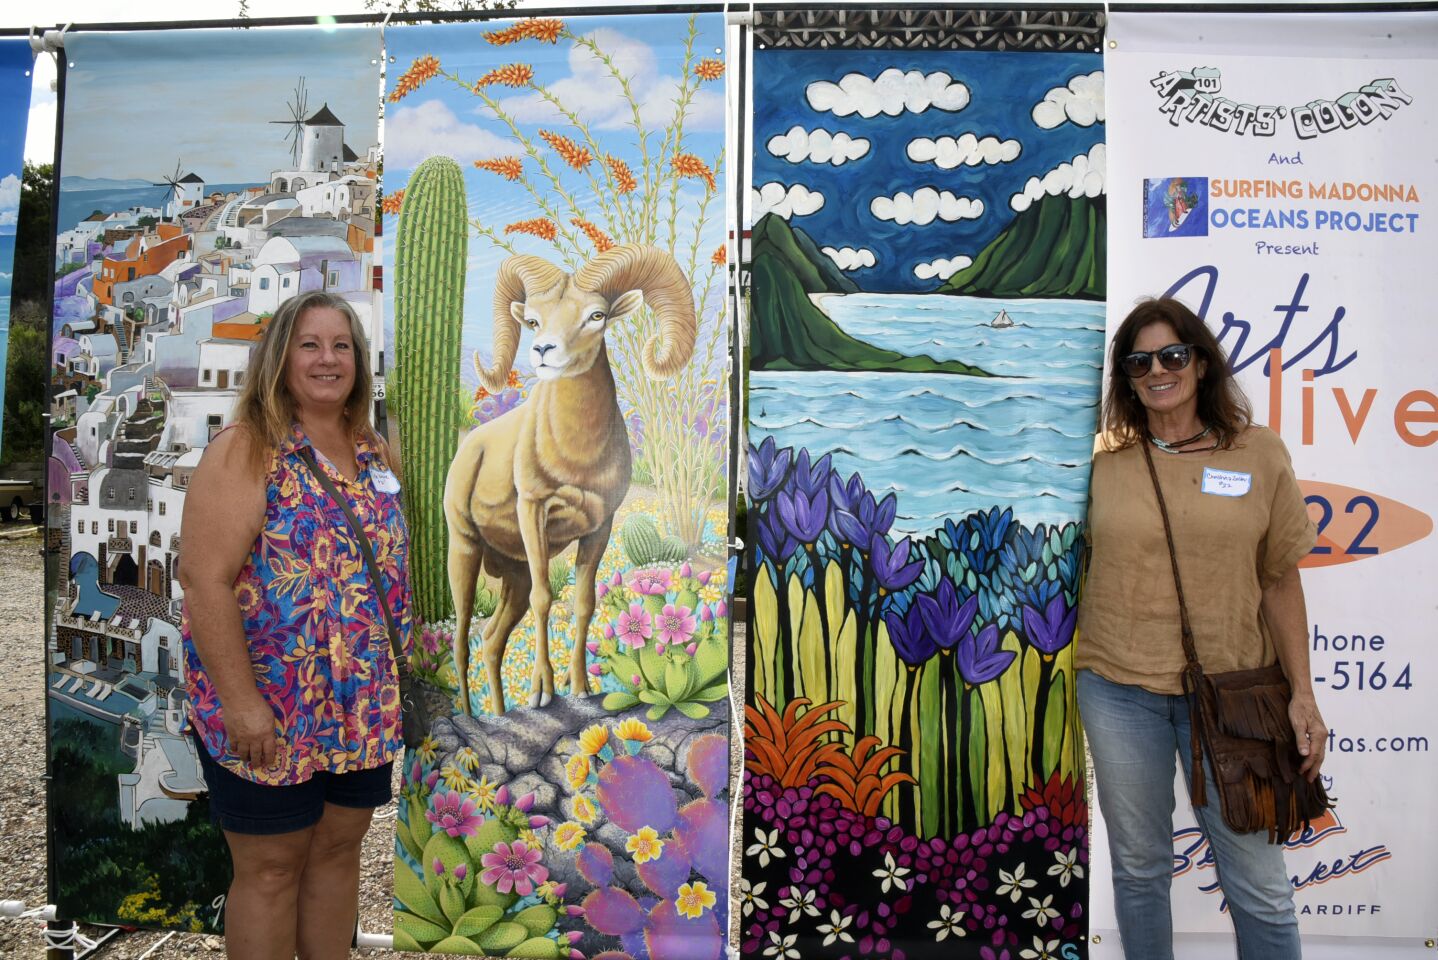 Tish Wynne with Southwest Bighorn Sheep, Christina Zeller with LaLaLand